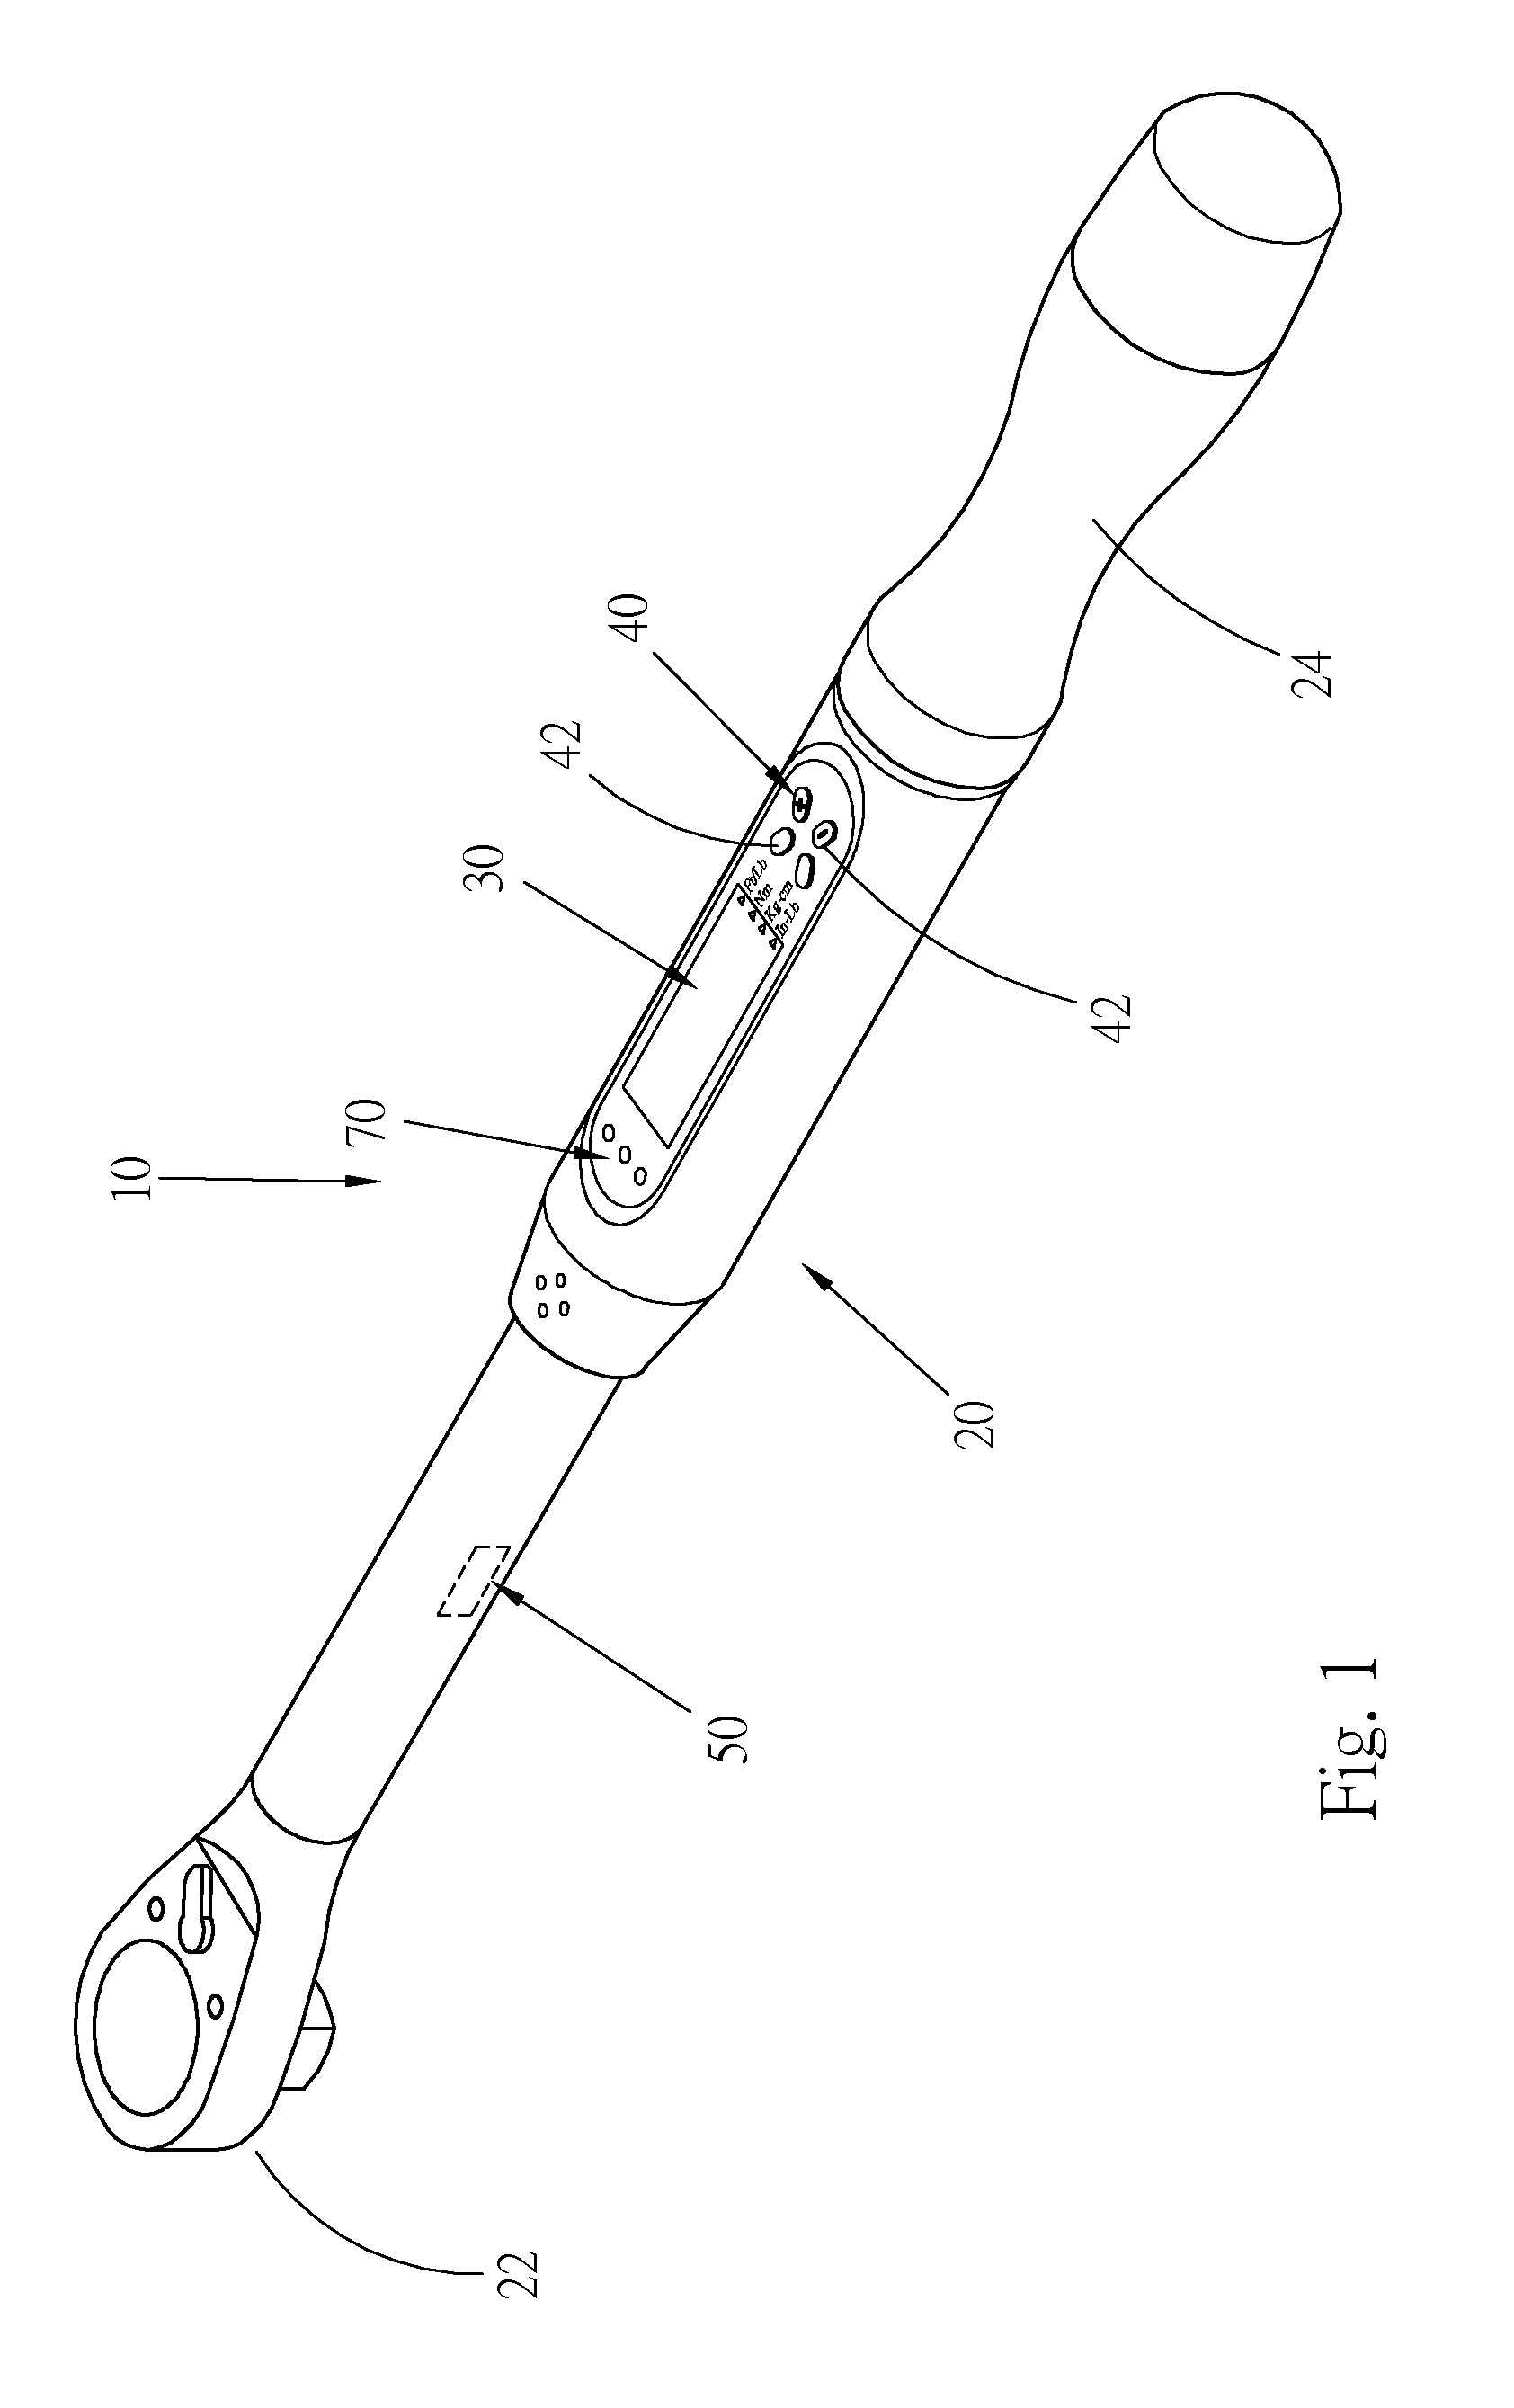 Electronic torque wrench with early-warning function